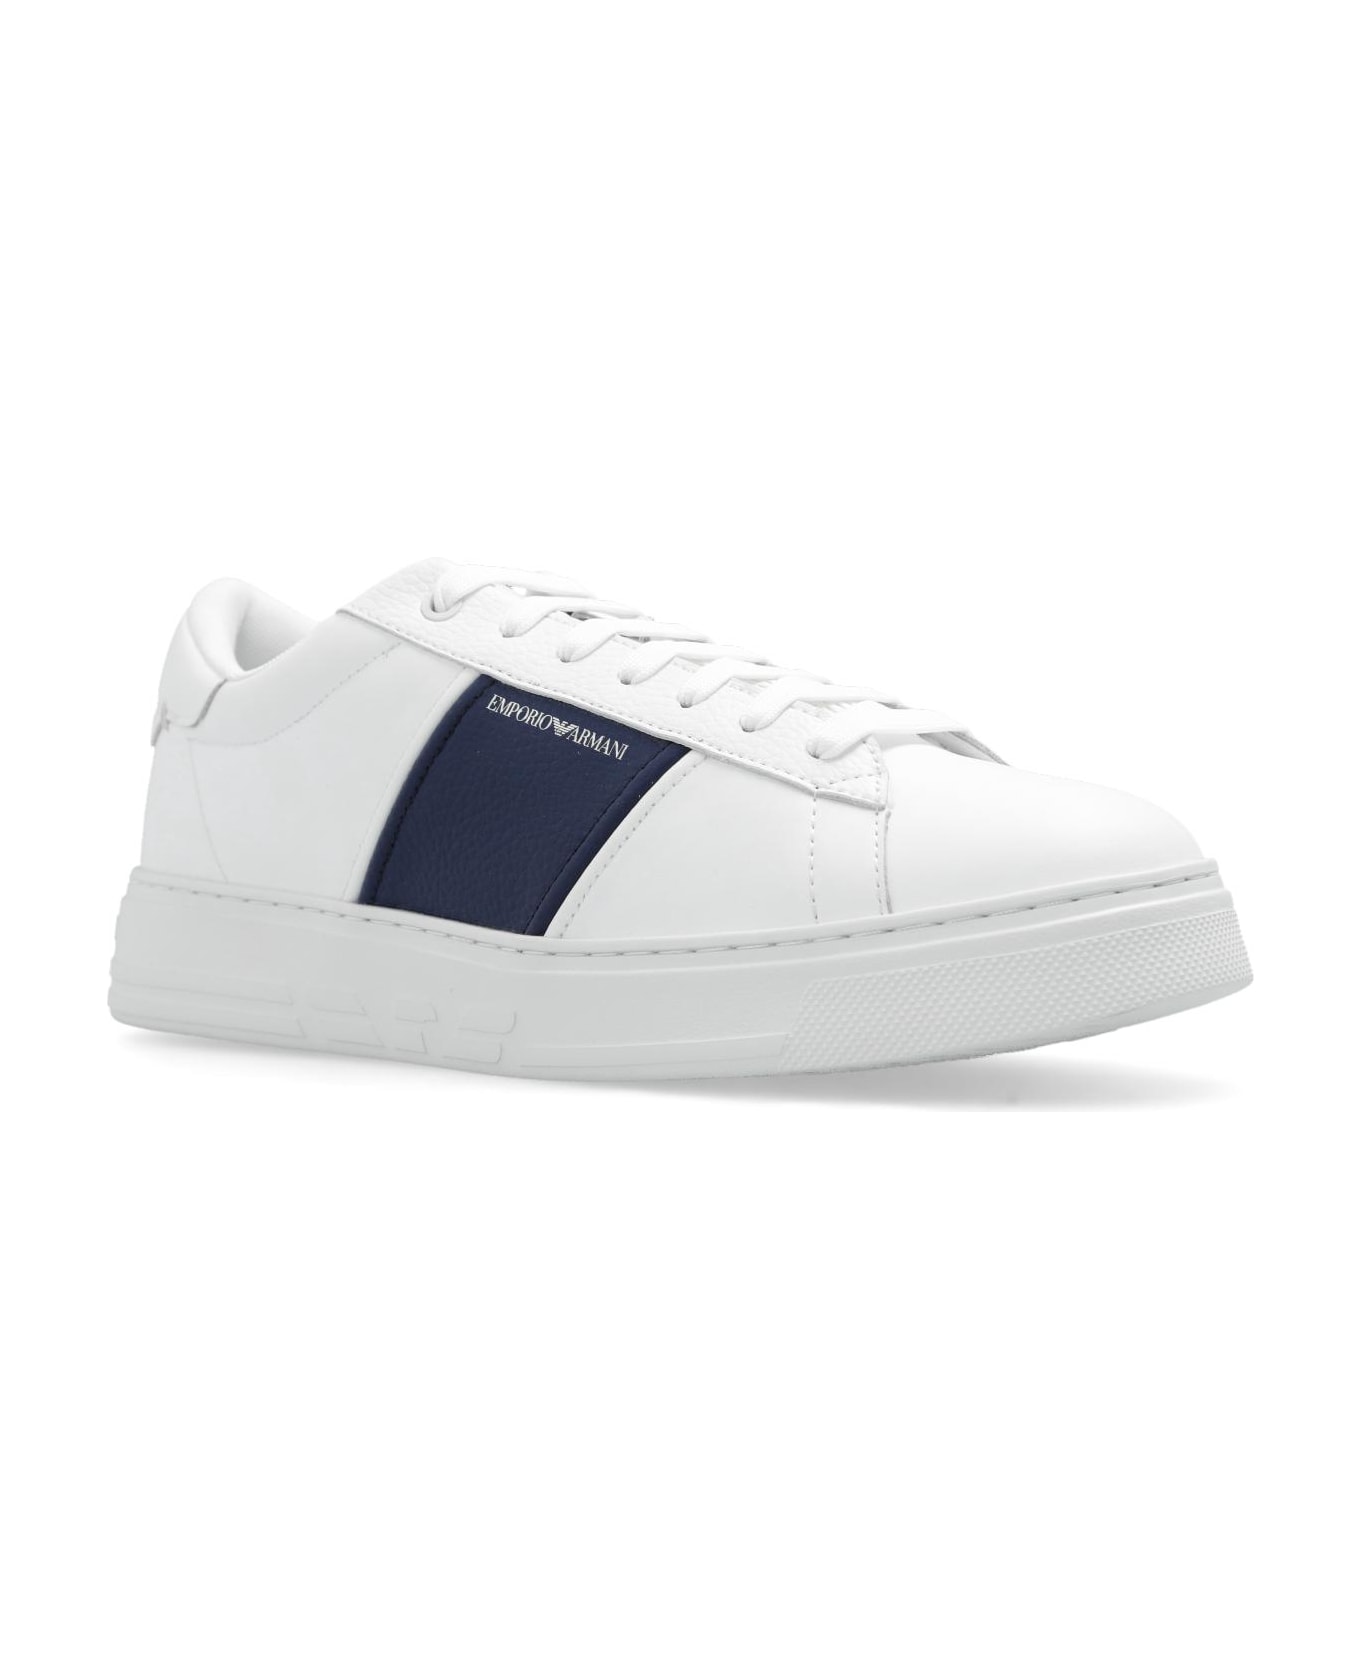 Emporio Armani Sneakers With Logo - Bianco スニーカー